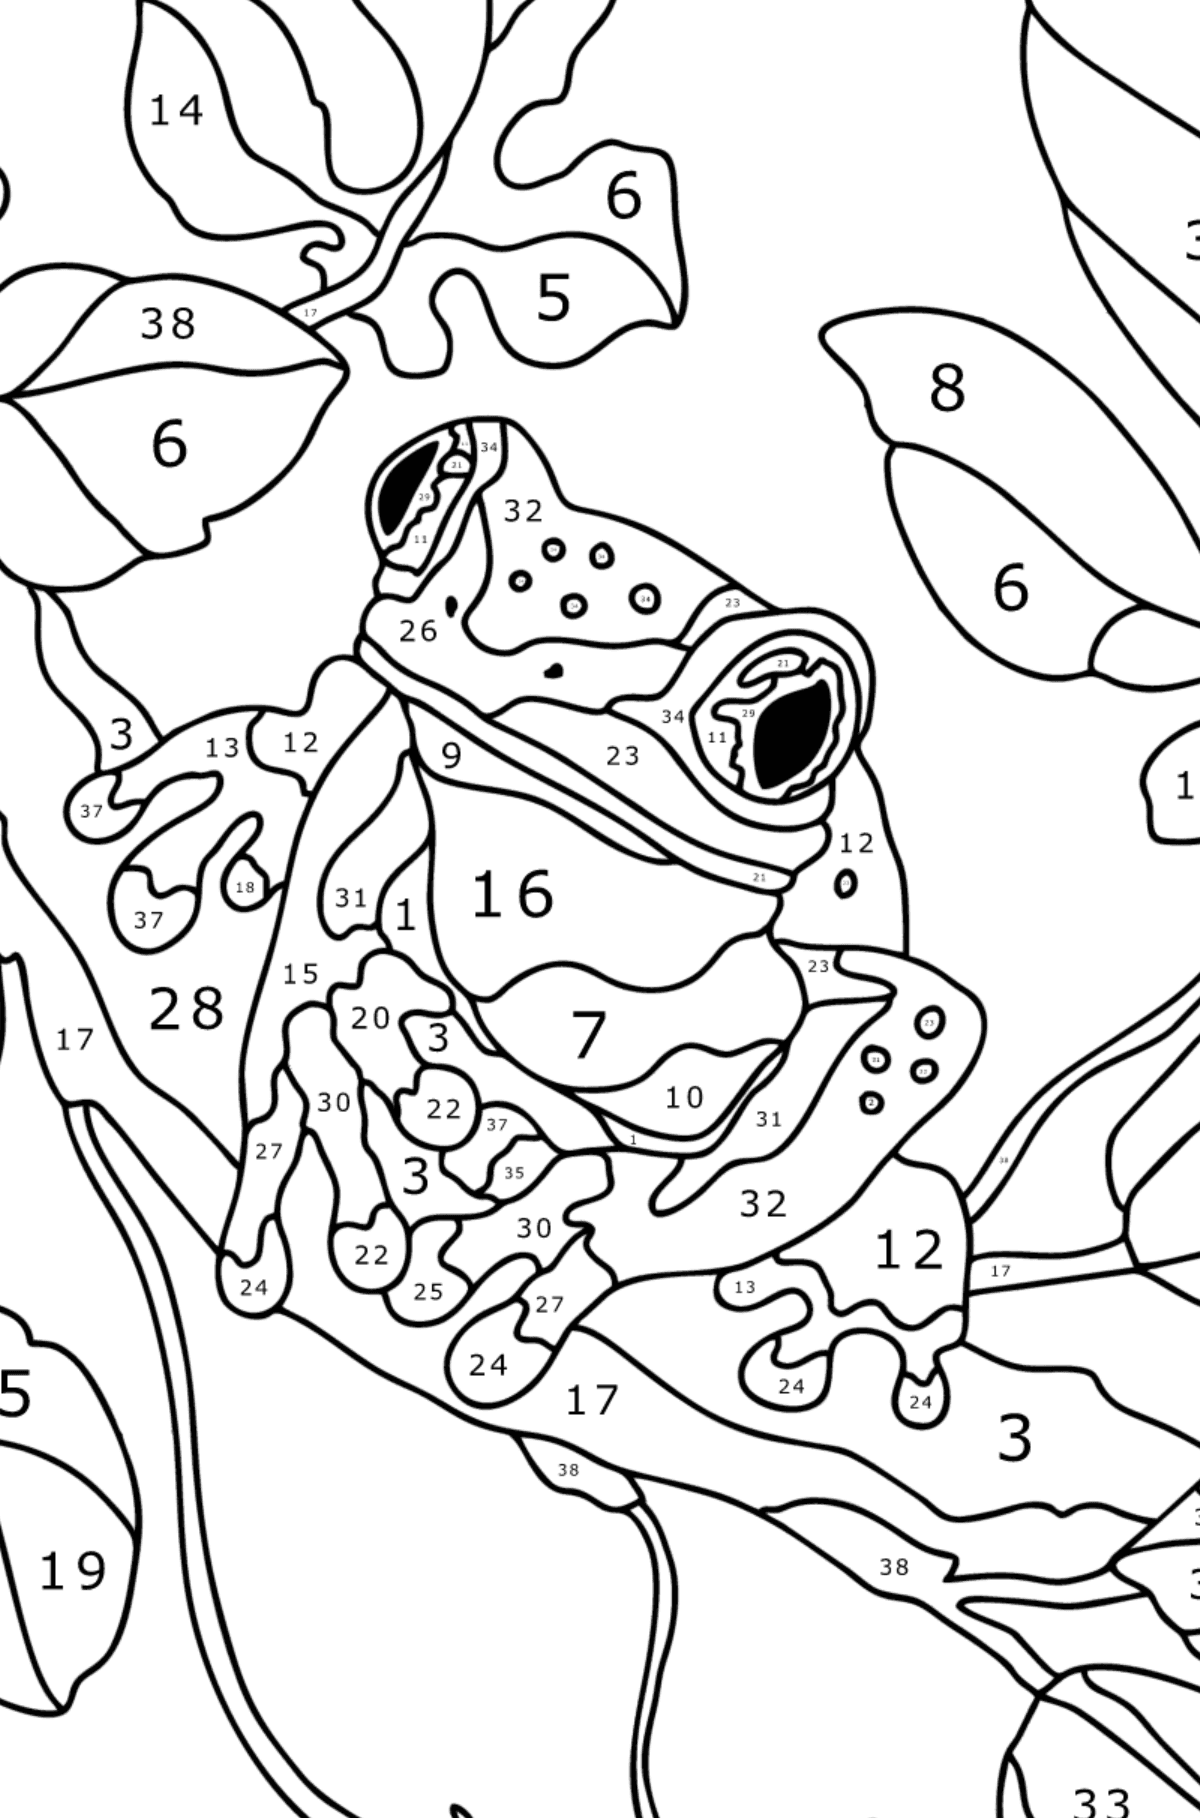 Beautiful frog - Frogs coloring pages for Adults online and printable